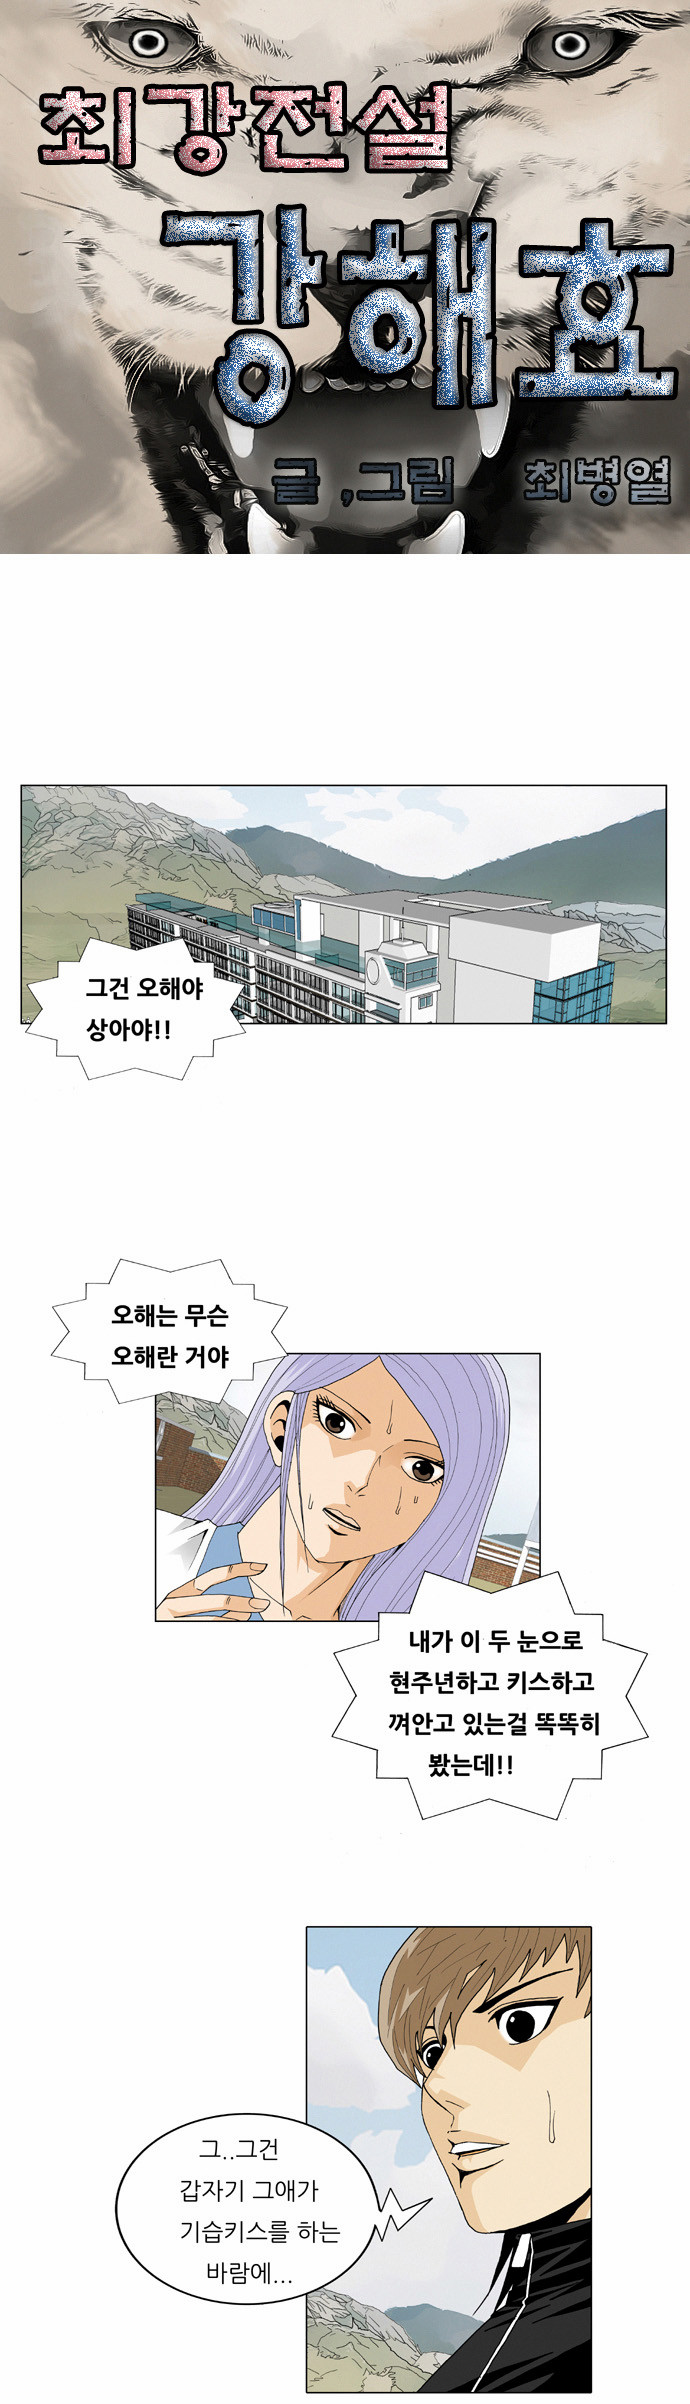 Ultimate Legend - Kang Hae Hyo - Chapter 58 - Page 3